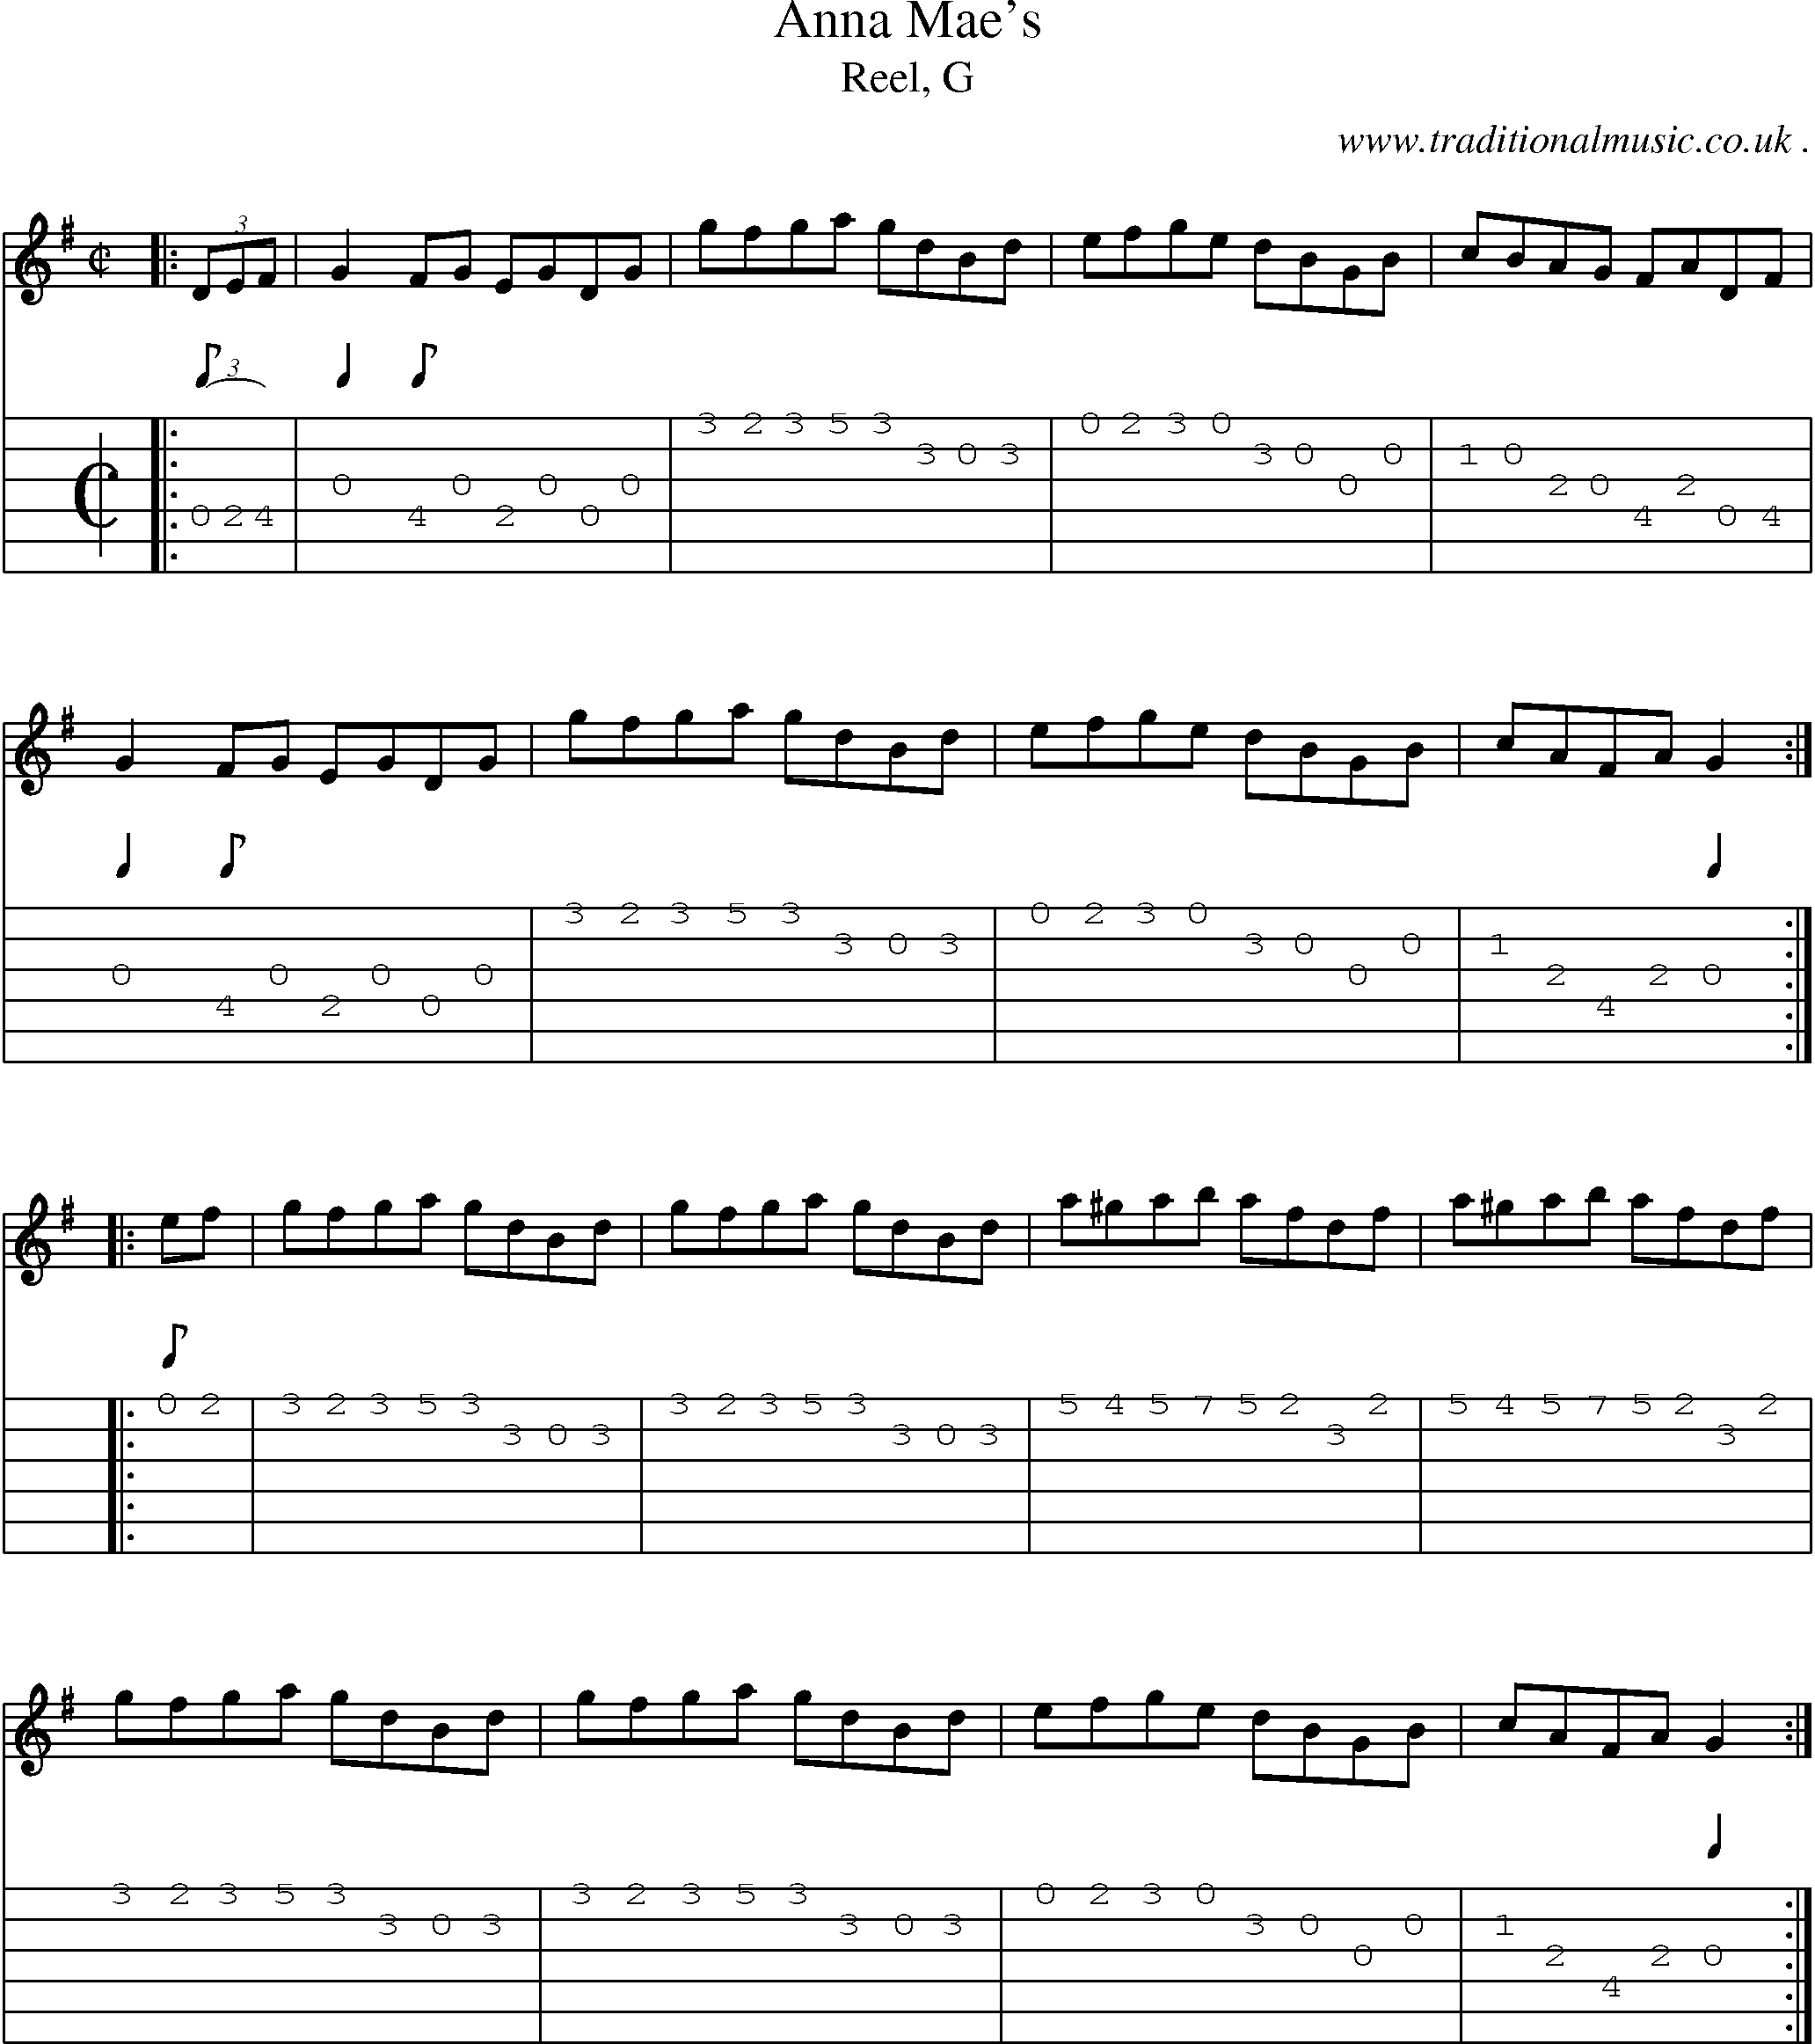 Sheet-music  score, Chords and Guitar Tabs for Anna Maes